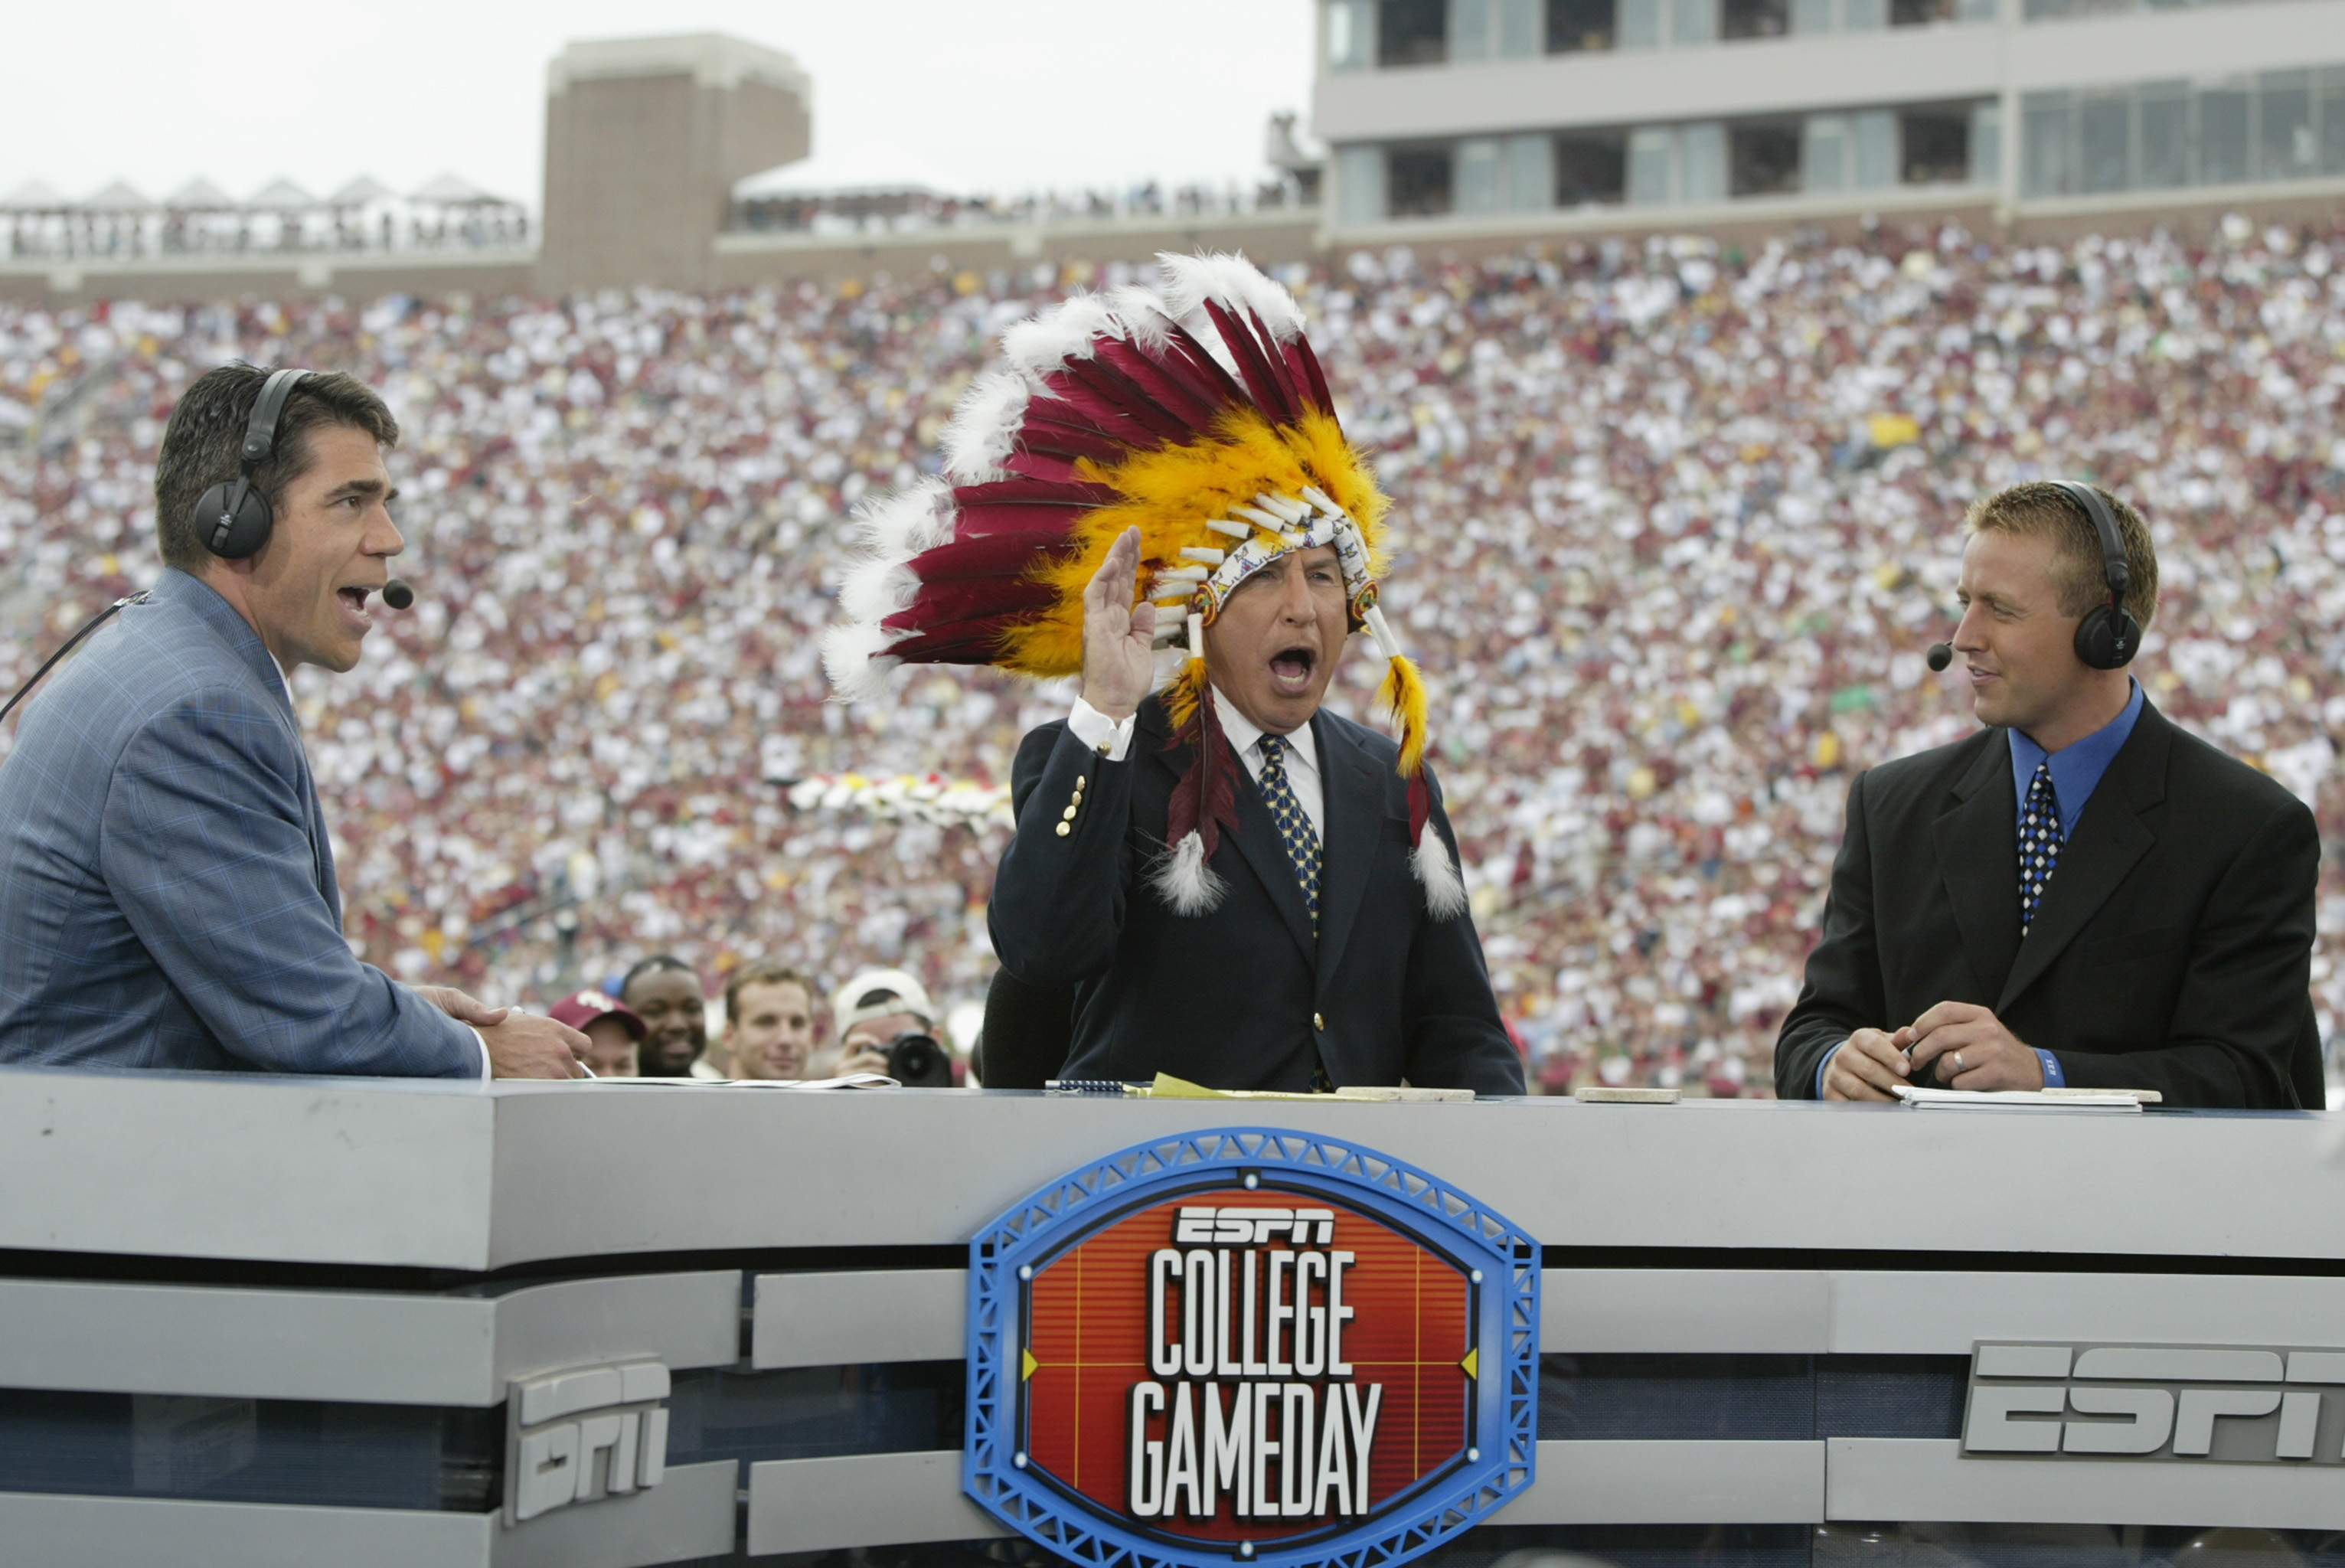 TALLAHASSEE, FL - OCTOBER 26:  ESPN College GameDay announcer Lee Corso dons an FSU headress as co-announcers (l to r) Chris Fowler and Kirk Herbstreit comment during the NCAA football game between Notre Dame and Florida State at Doak Campbell Stadium on